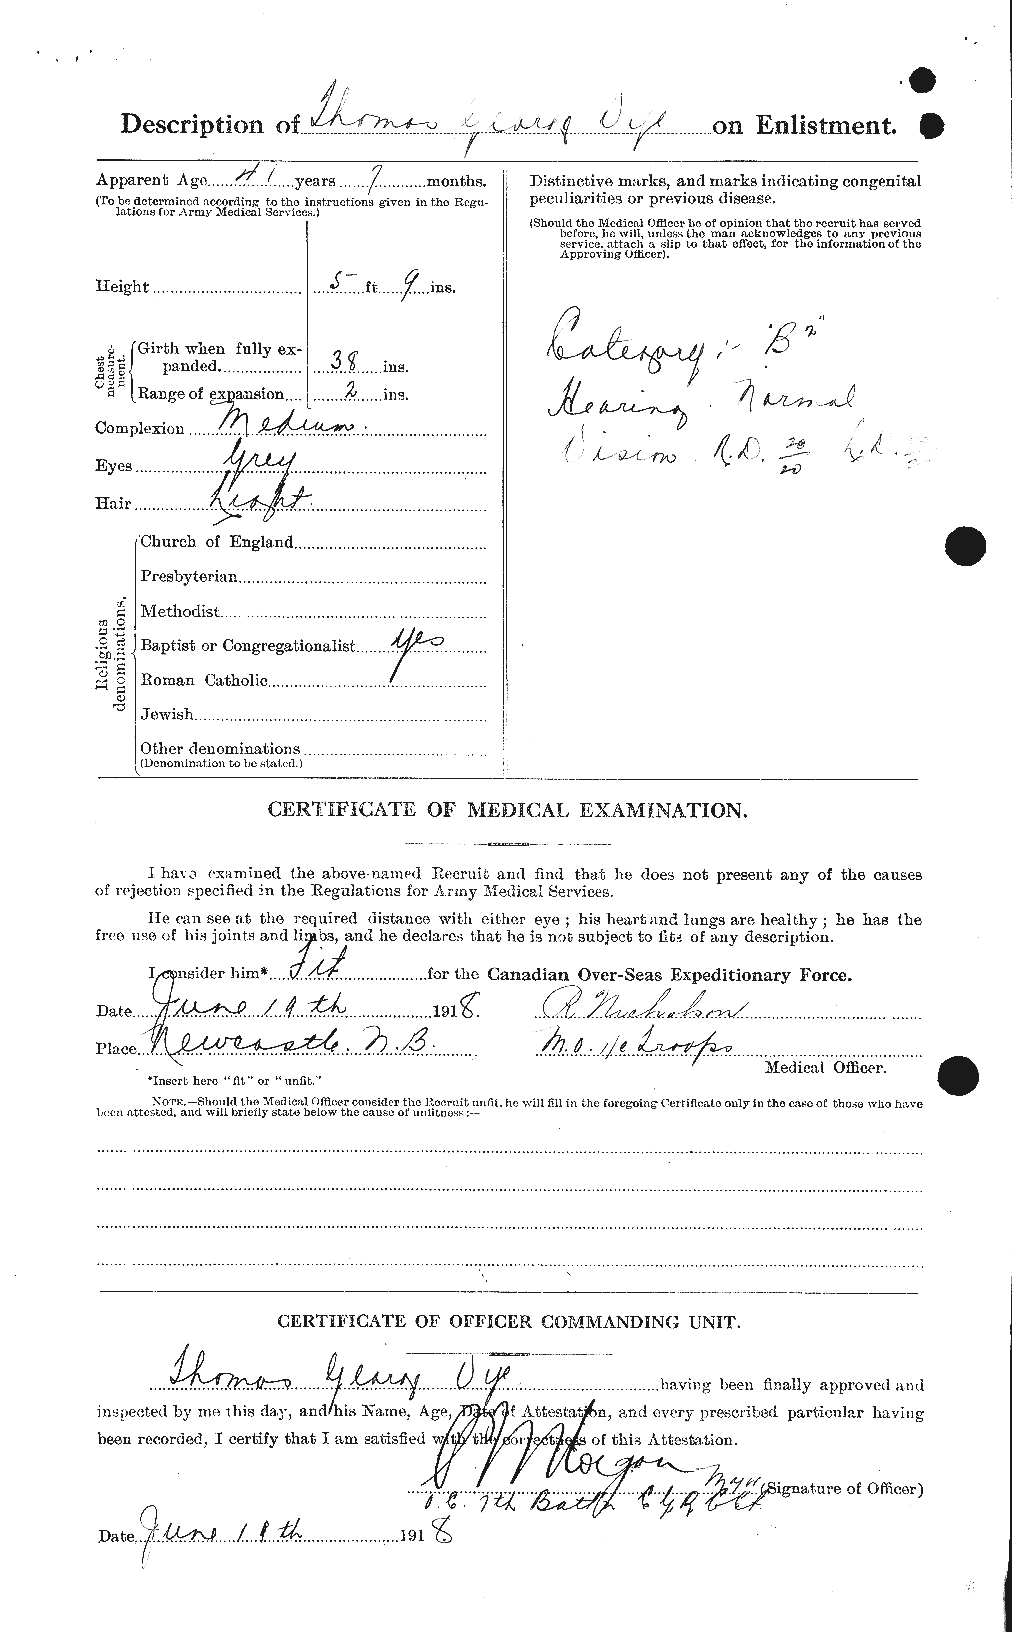 Personnel Records of the First World War - CEF 652580b